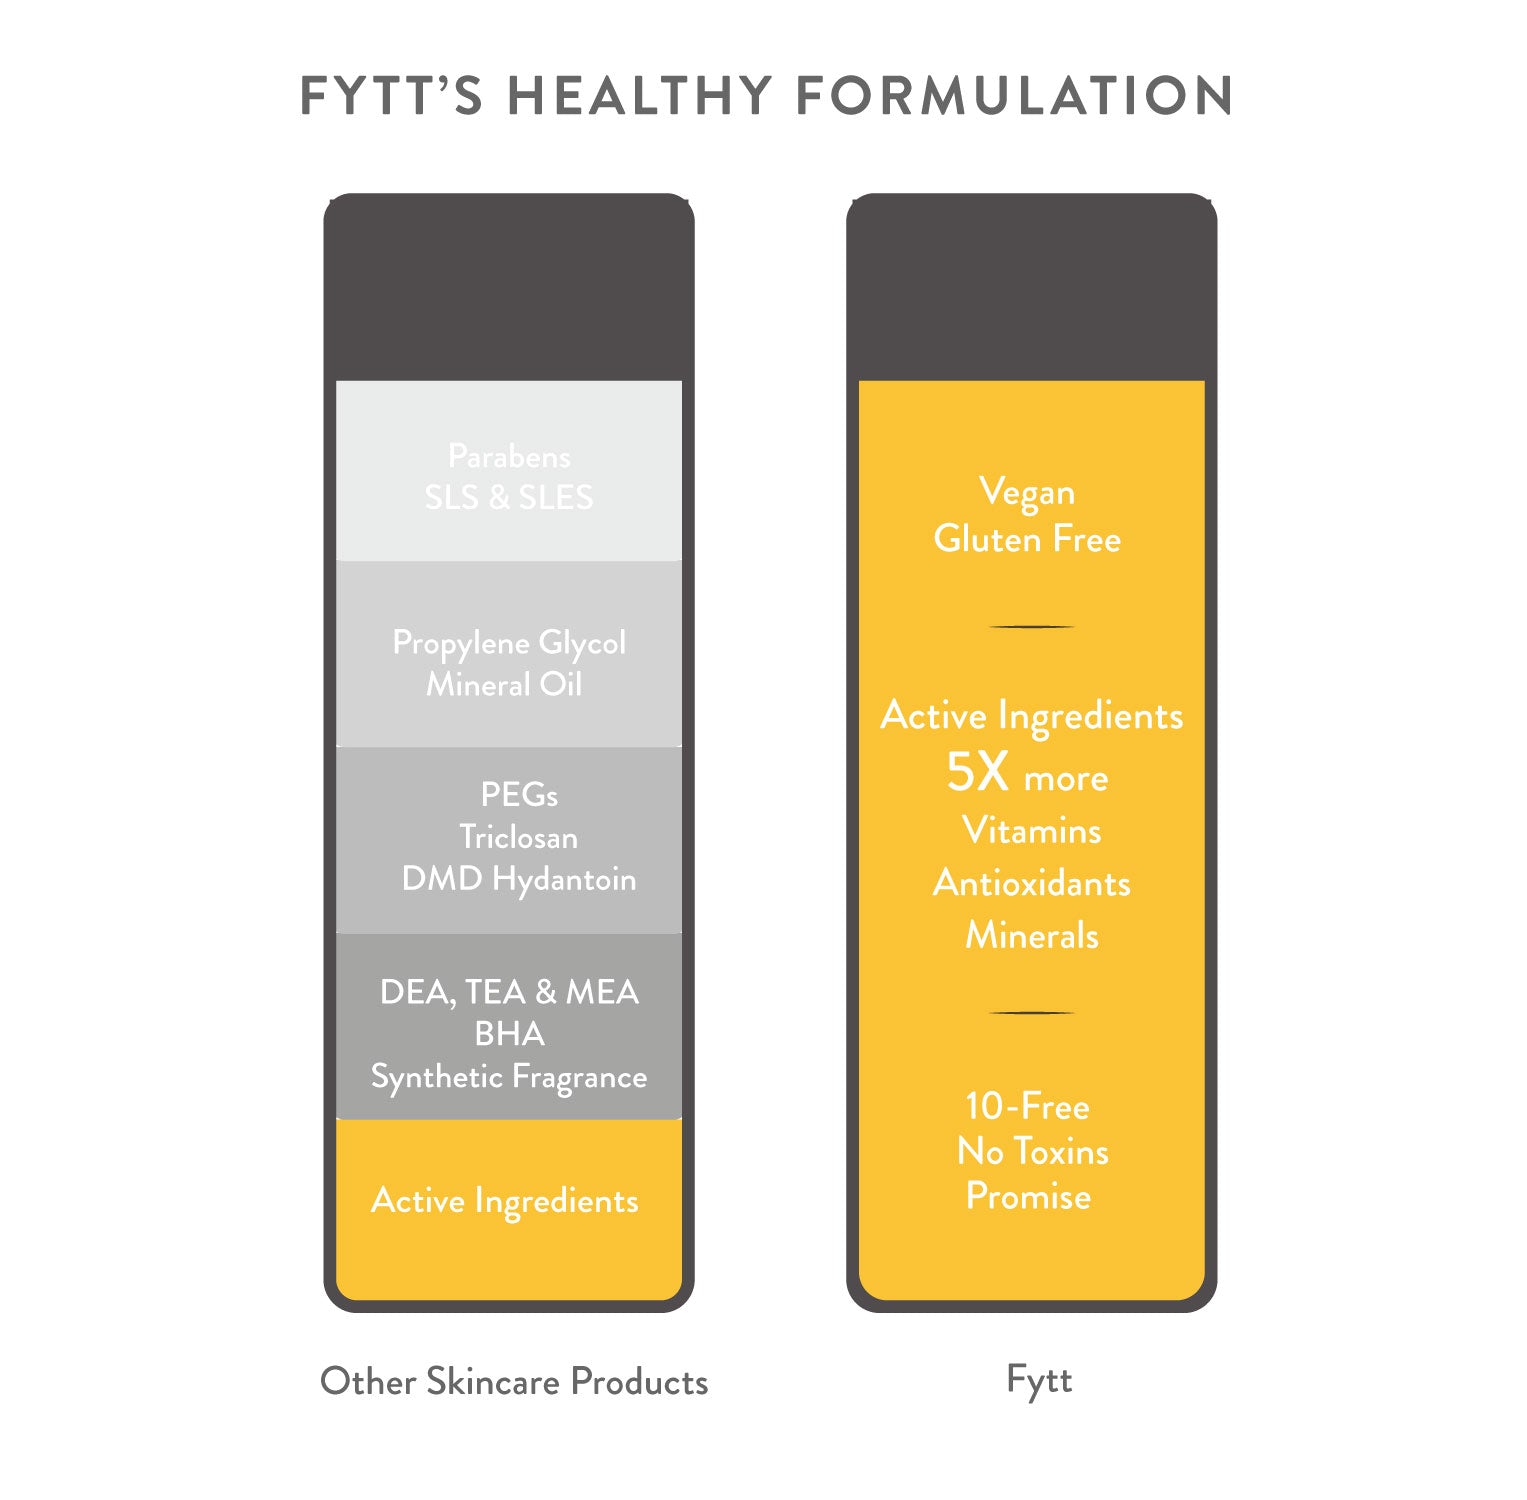 Comparison chart showcasing "Other Skincare Products" with multiple ingredients, alongside "Cyan Ares" with fewer, claimed to be healthier ingredients. Emphasizing "Vegan," "Gluten-Free," and the "10-Free No Toxins Promise." Discover the benefits of Cyan Ares's Brightening Exfoliating Mask and Carrot Ginger Smoothie.